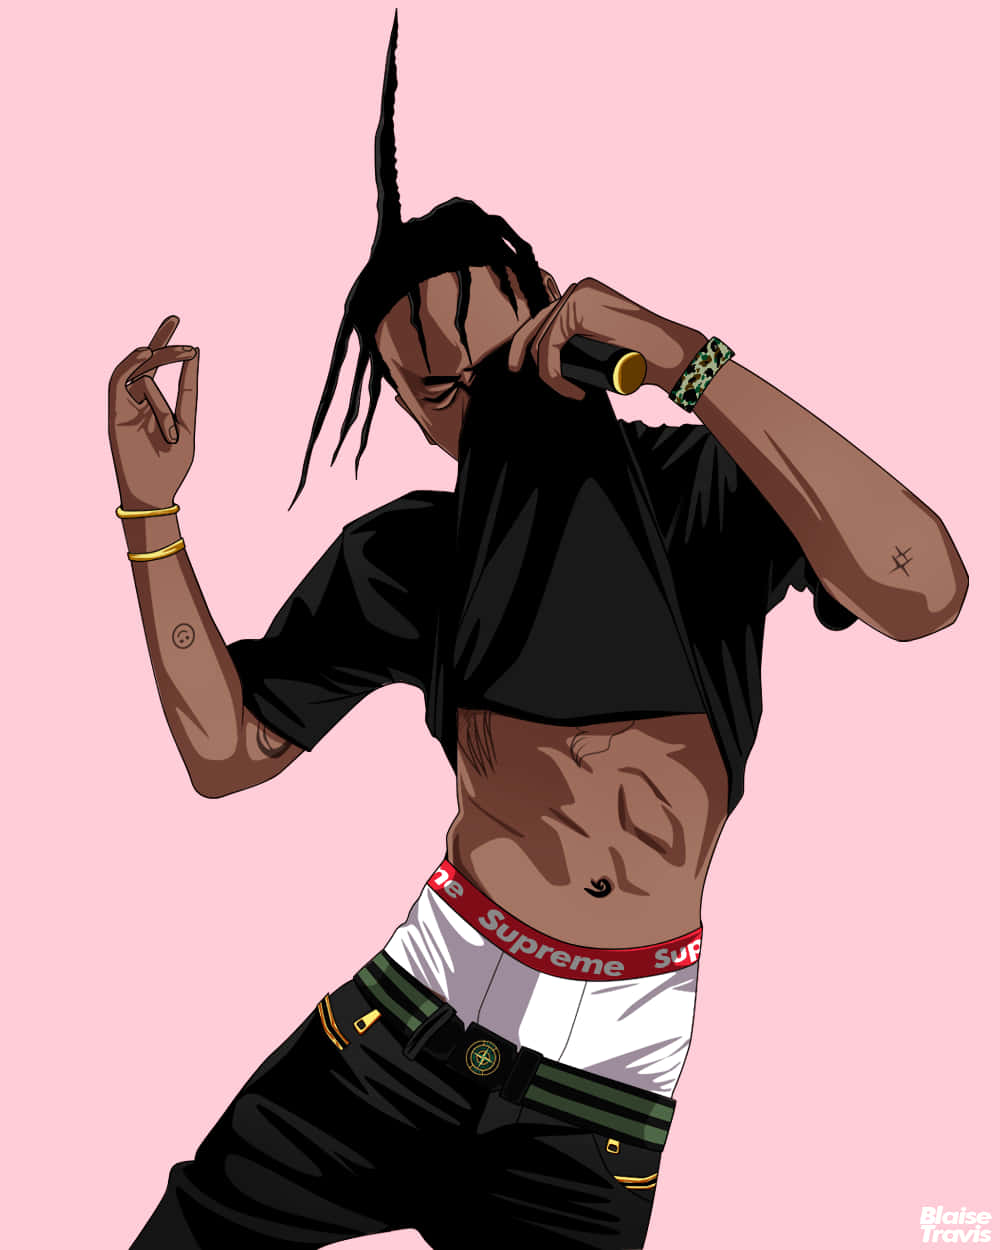 An Out of this World Comic Illustration of Travis Scott Wallpaper